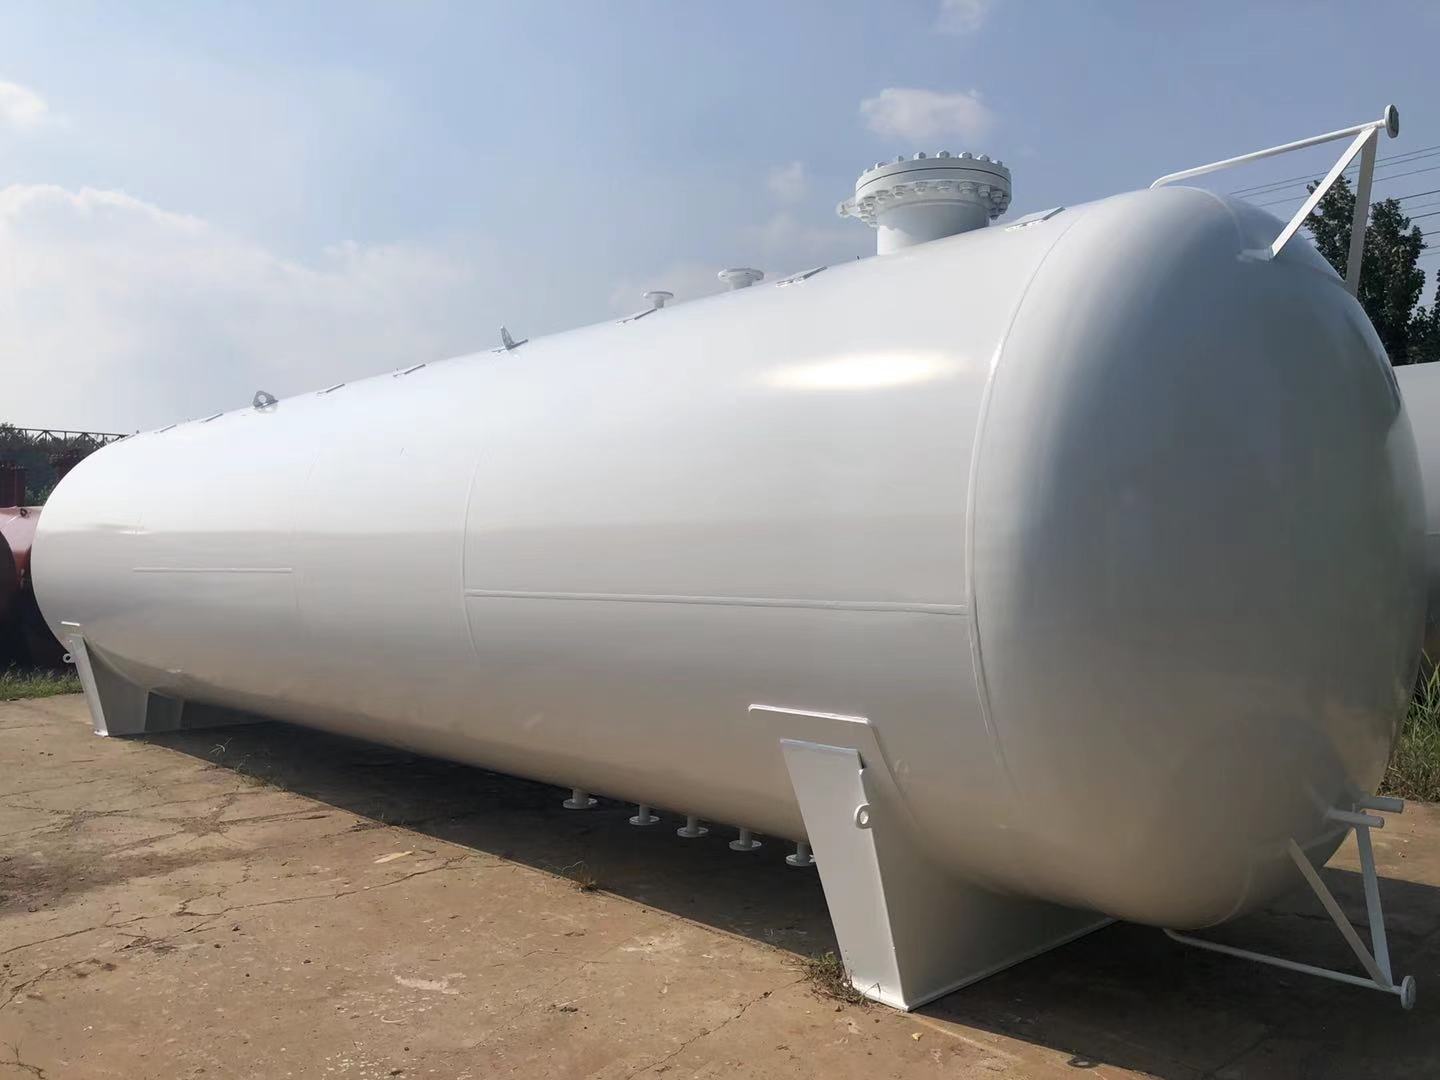 The liquefied petroleum gas storage tank adopts the national standard Q345R steel plate